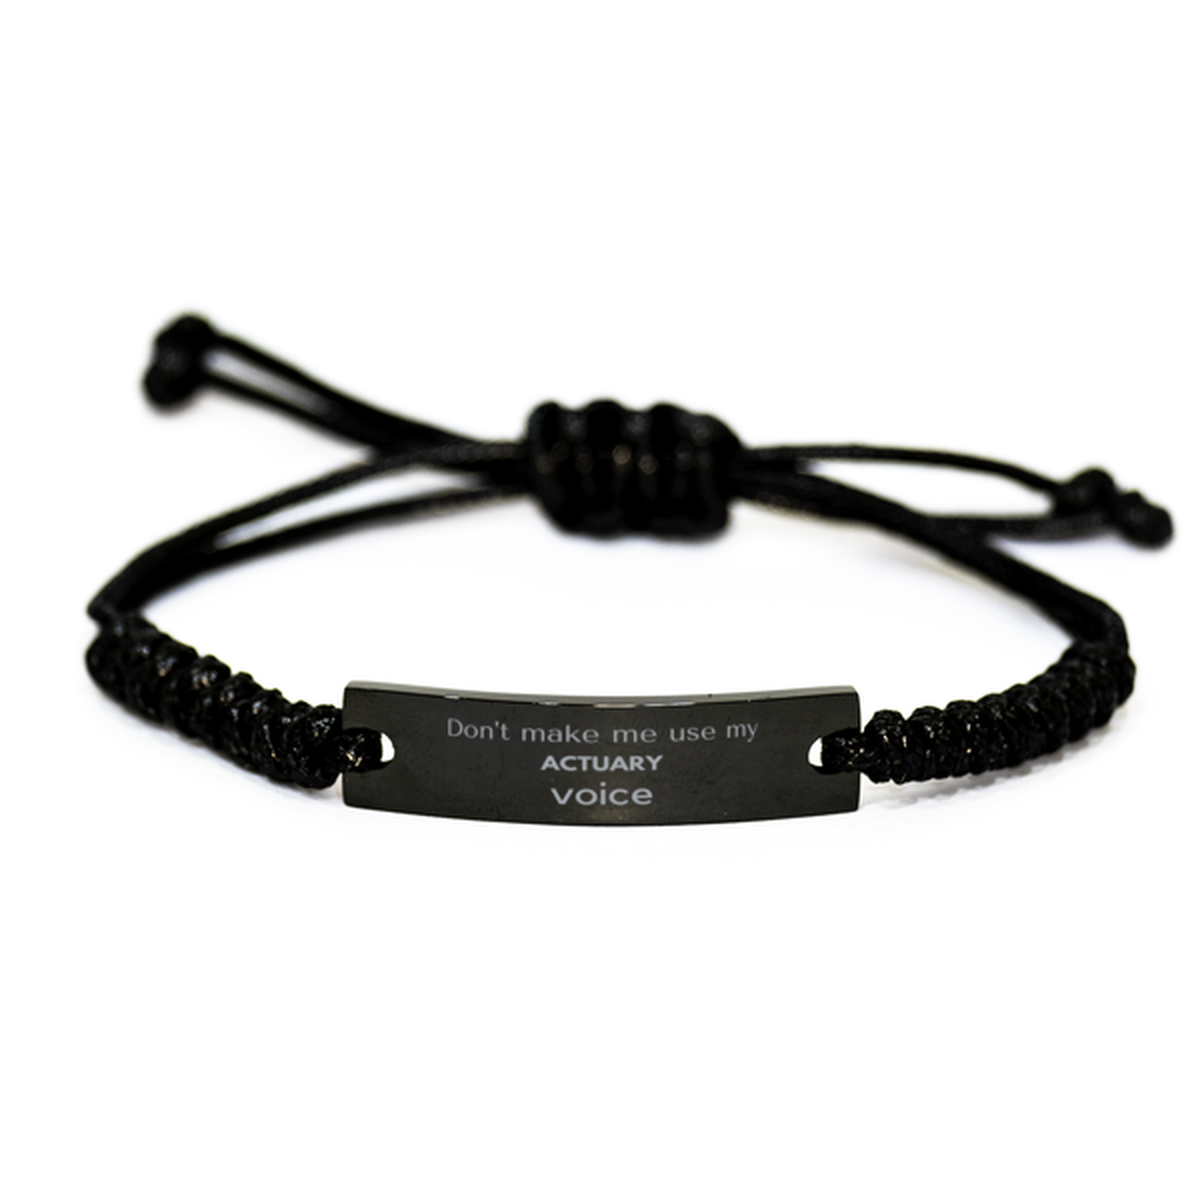 Don't make me use my Actuary voice, Sarcasm Actuary Gifts, Christmas Actuary Black Rope Bracelet Birthday Unique Gifts For Actuary Coworkers, Men, Women, Colleague, Friends